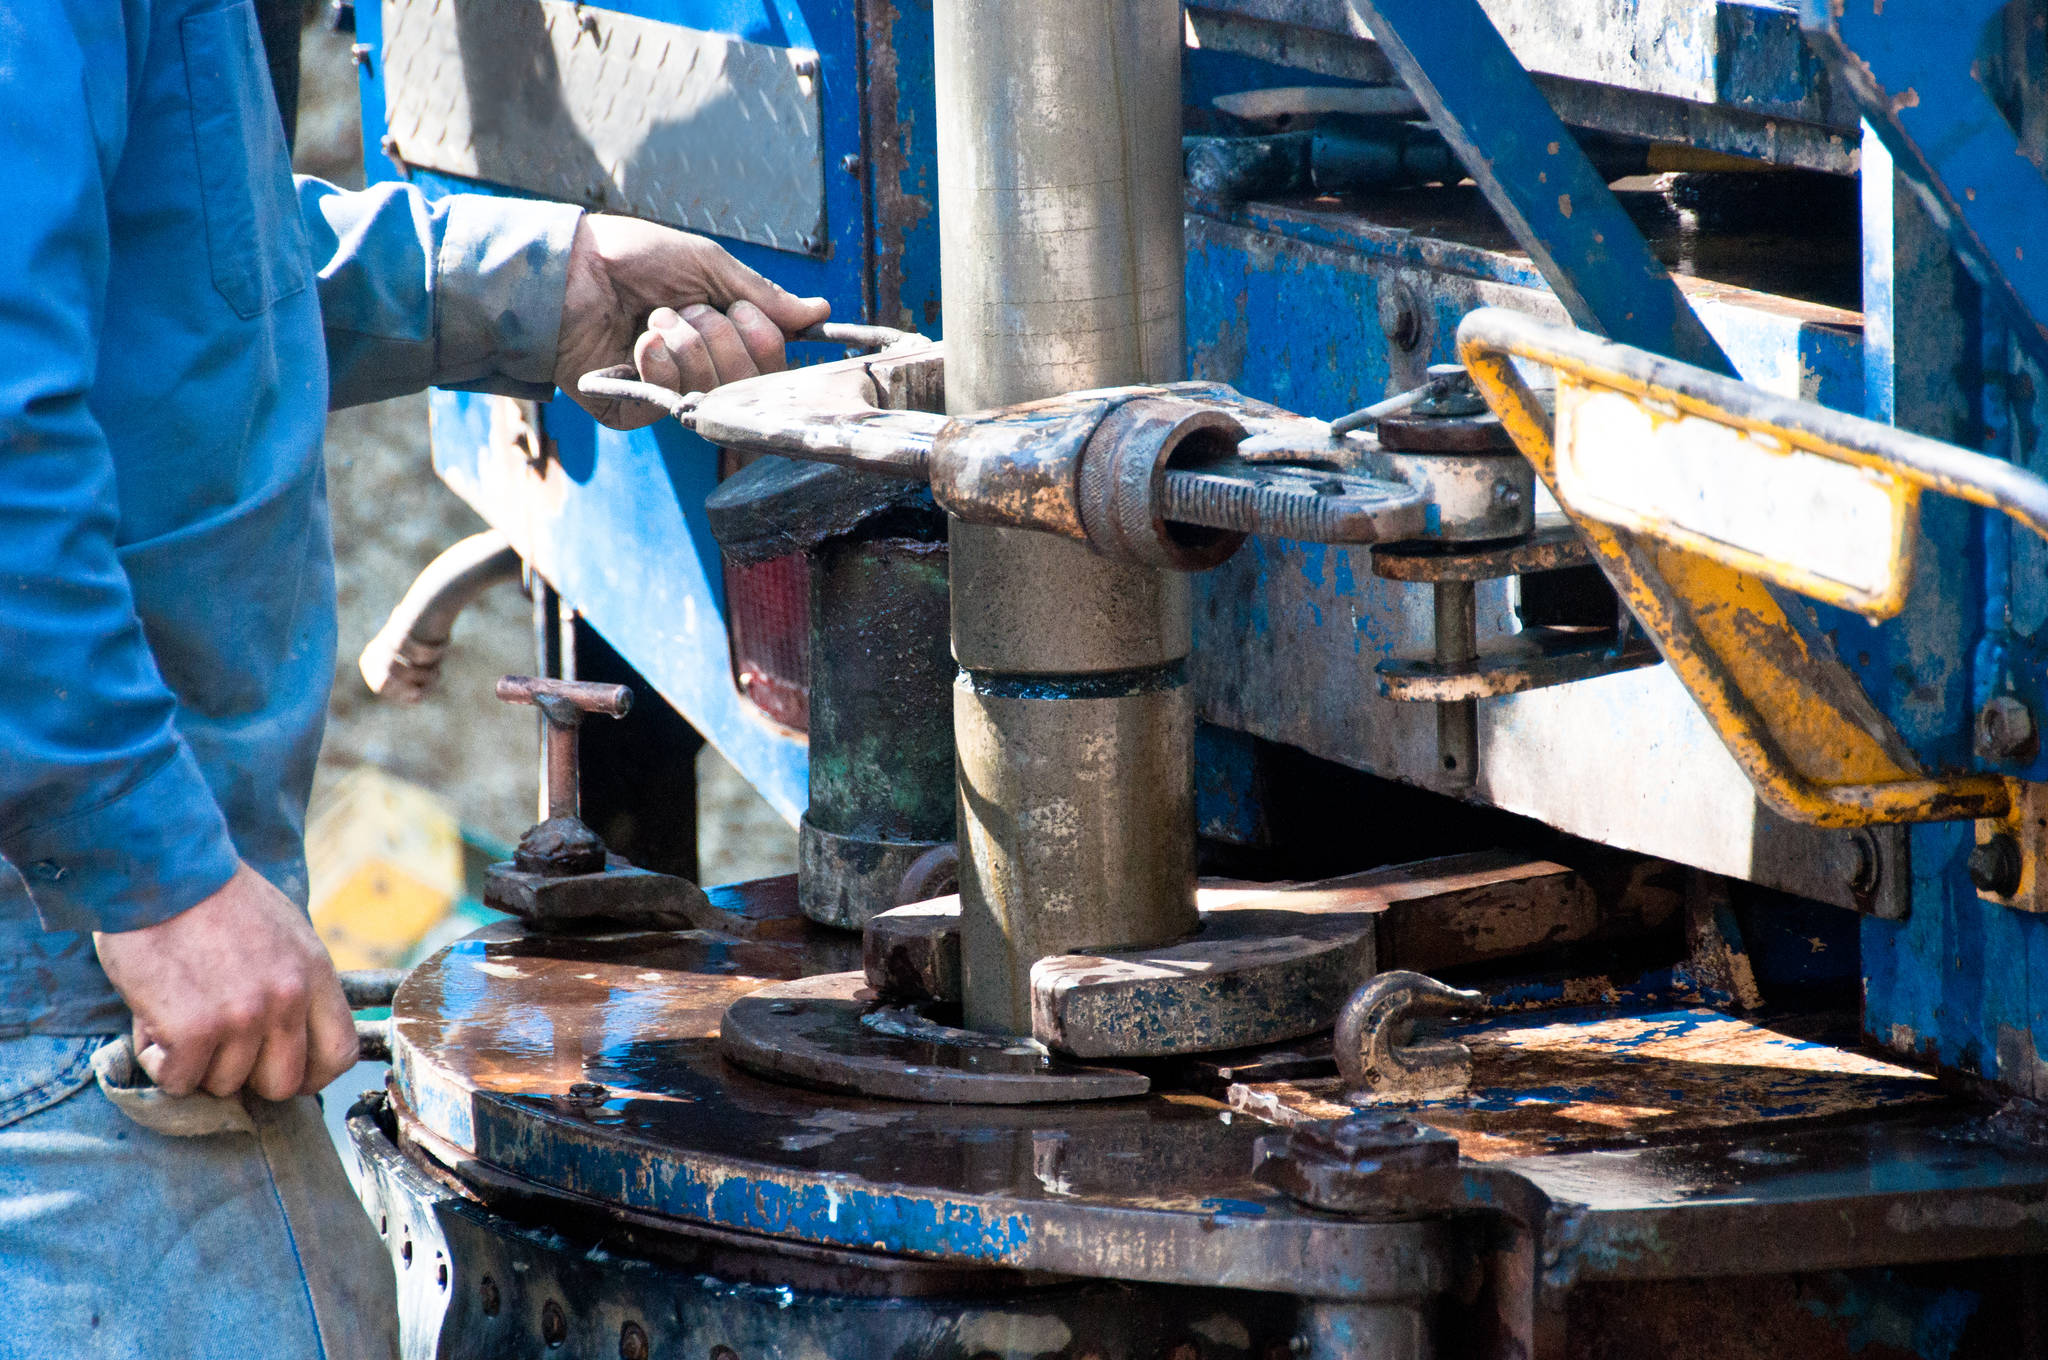 A worker uses a large wrench to screw on a drill casing during the operation of a water well drill rig. Photo by Erika Mitchell